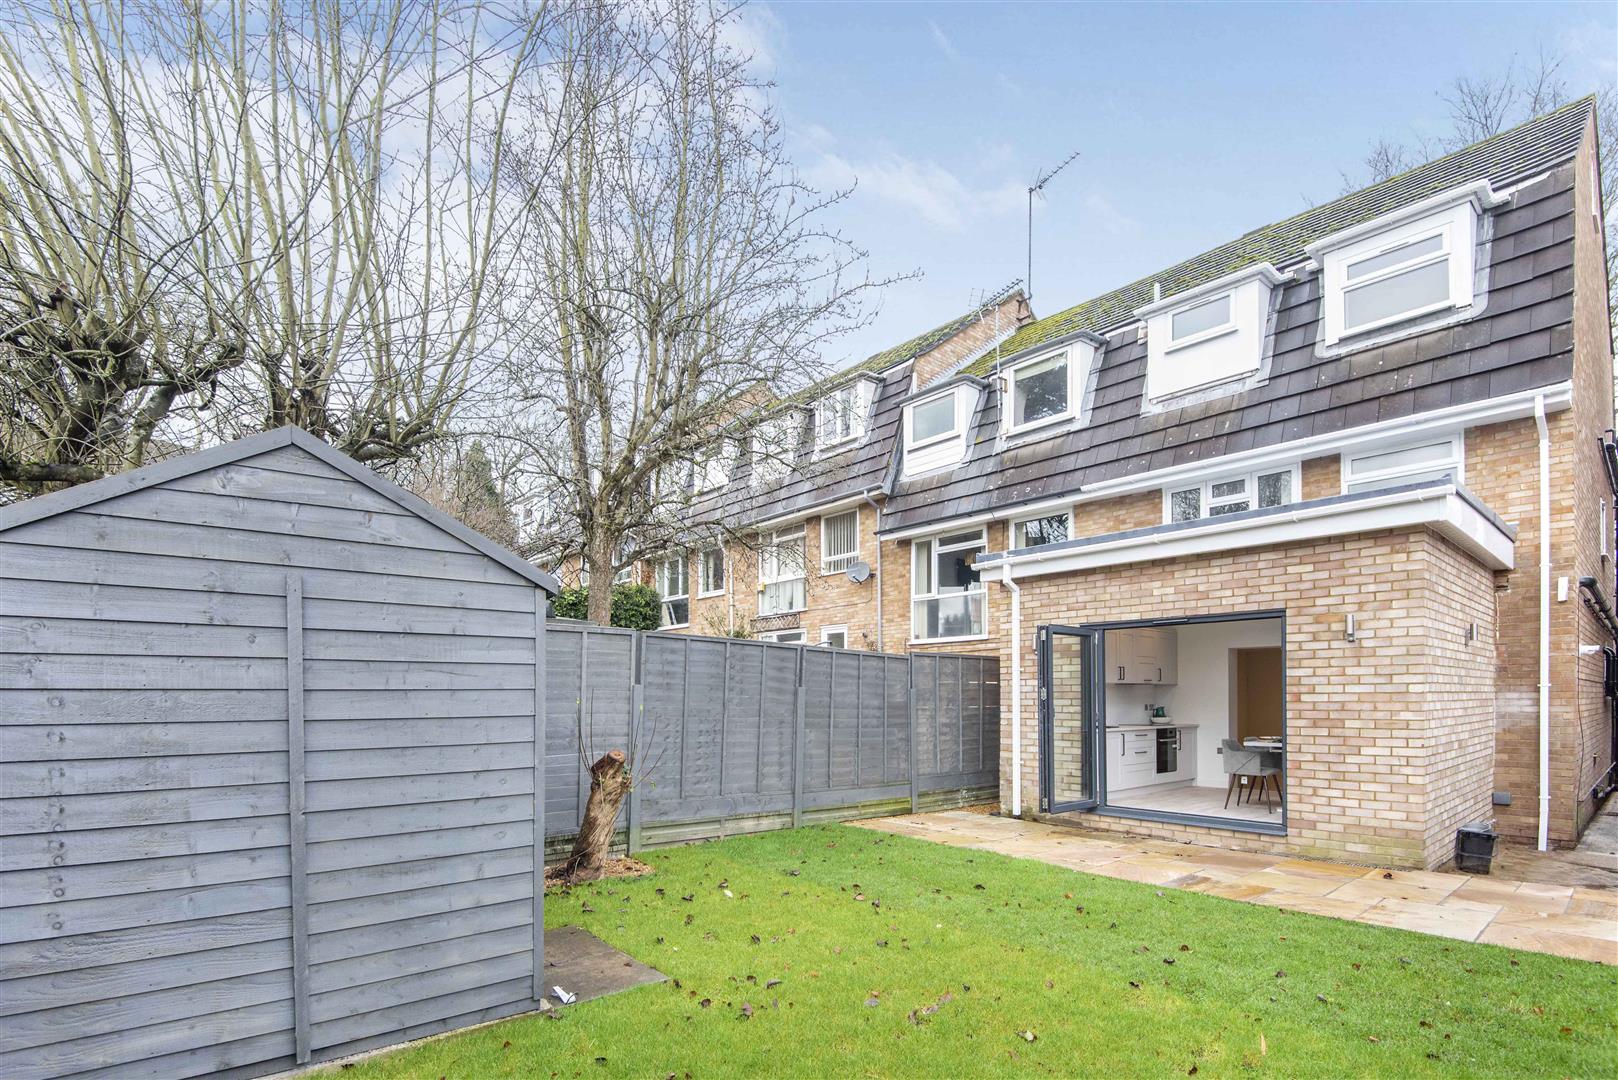 Knighton Close Caversham house for sale in Reading